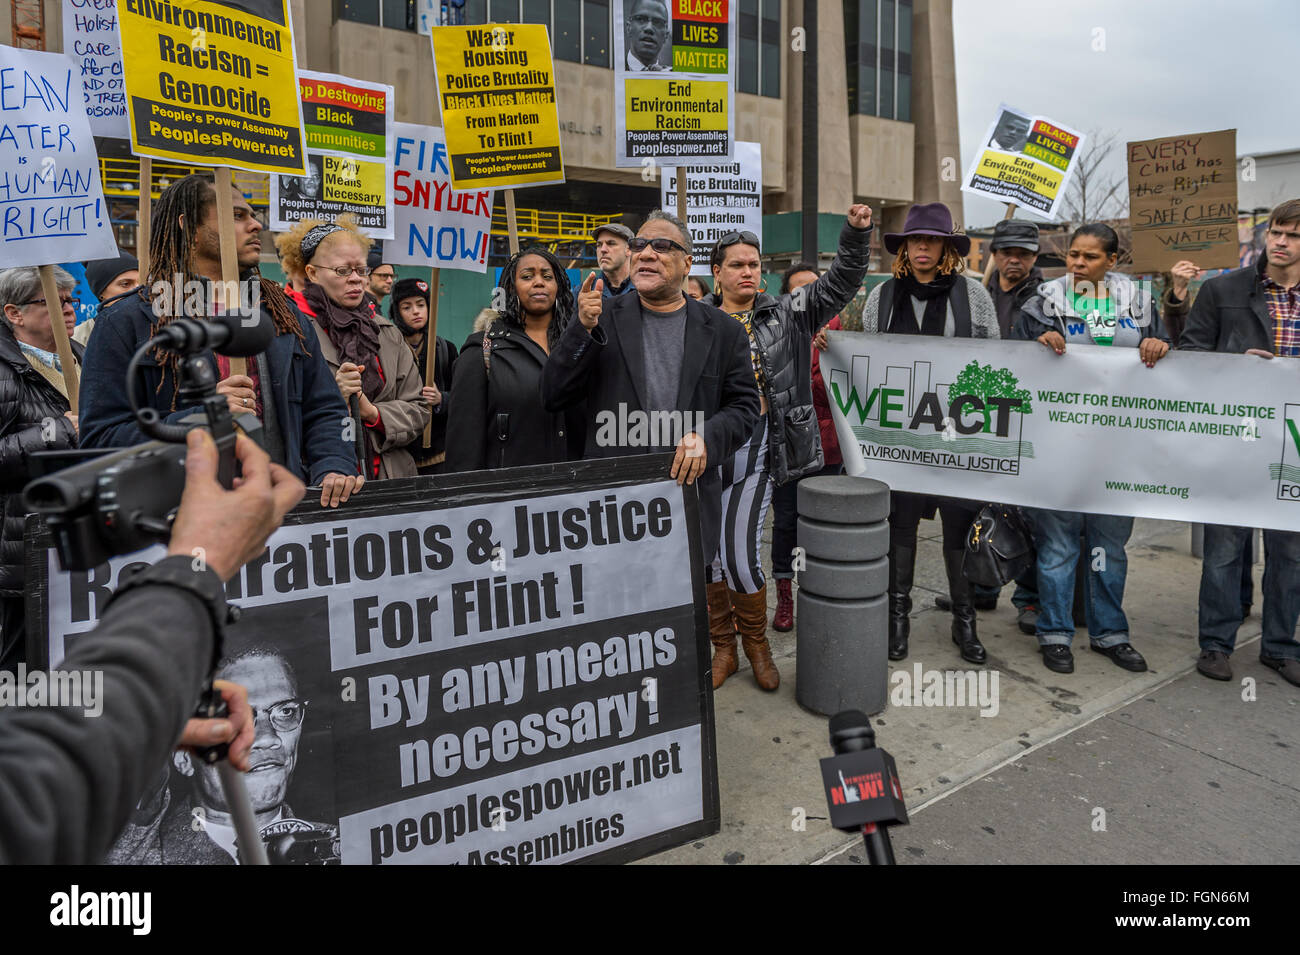 New York, United States. 21st Feb, 2016. Larry Holmes from People's Power Assembles speaking at NYC Solidarity Rally for Flint Credit:  Erik Mc Gregor/Pacific Press/Alamy Live News Stock Photo